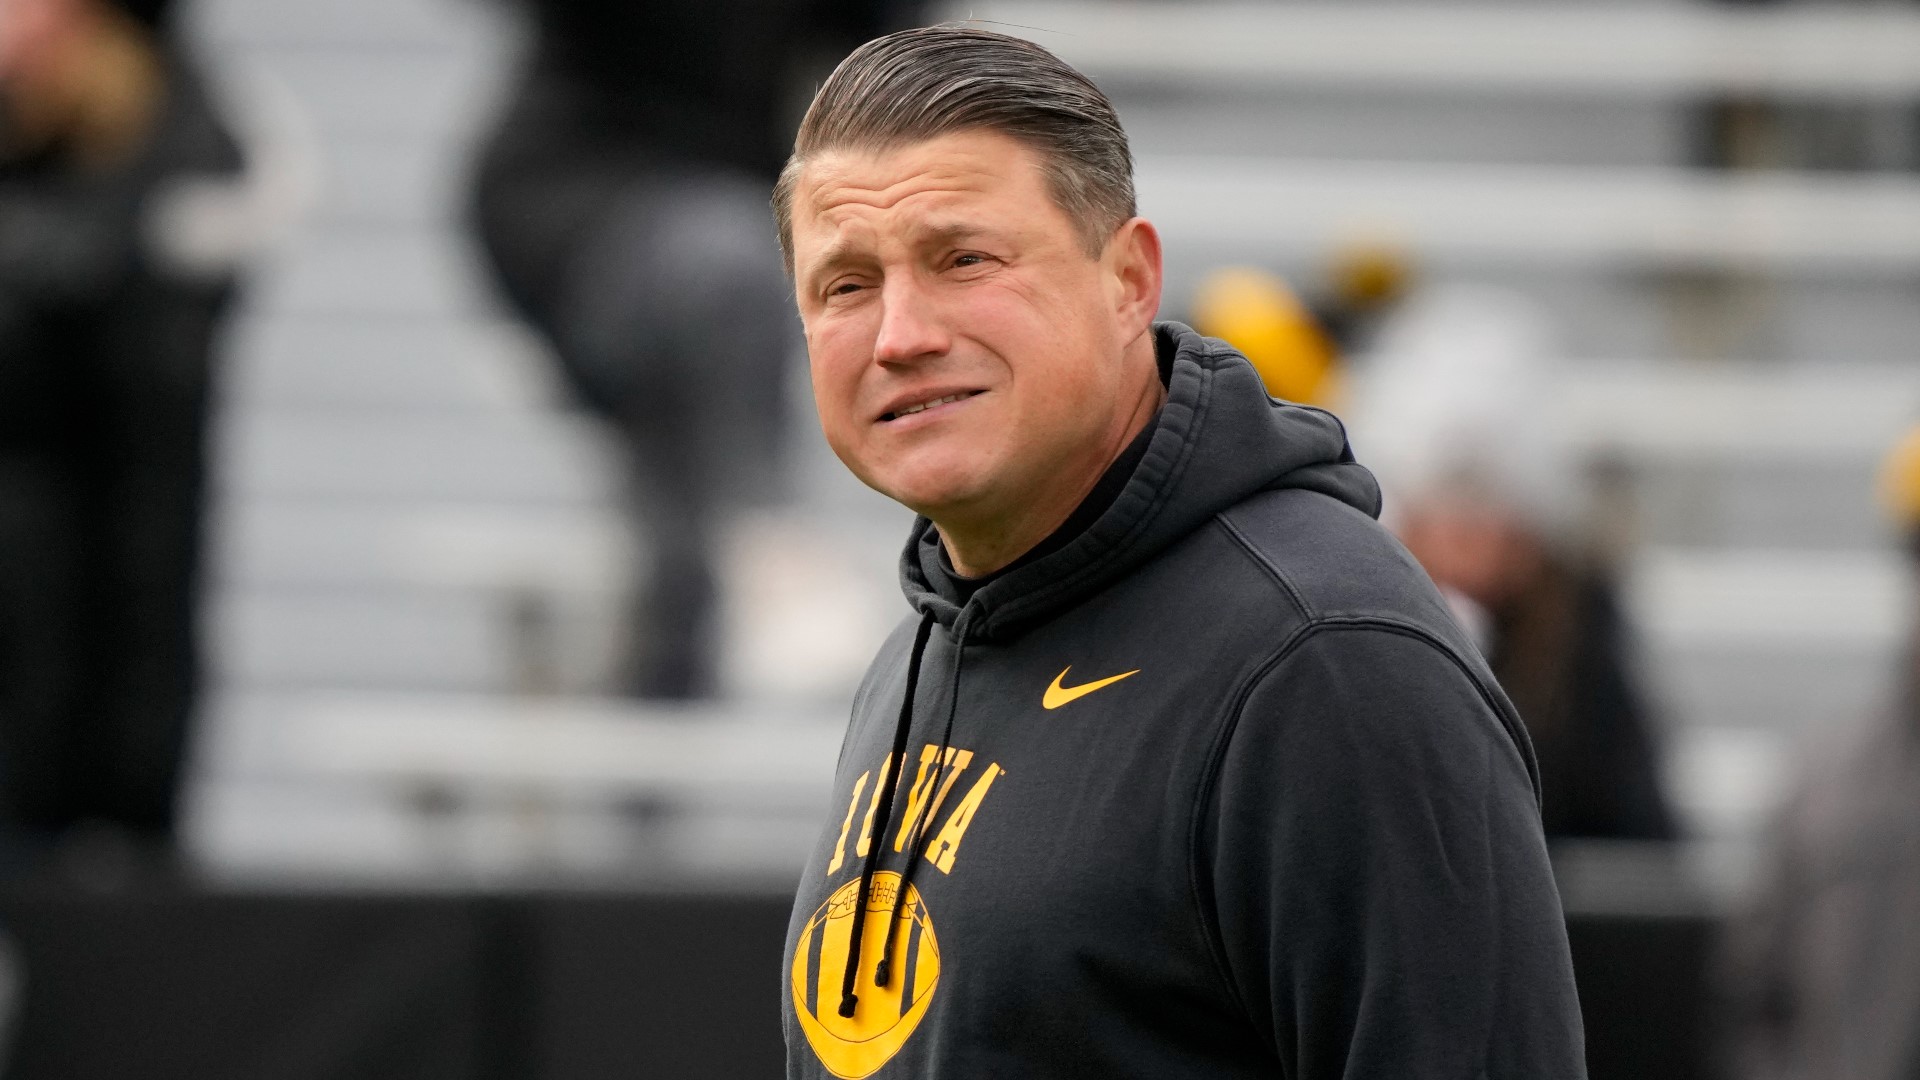 Before the season began, Ferentz took a pay cut due to ongoing offensive issues within the team.